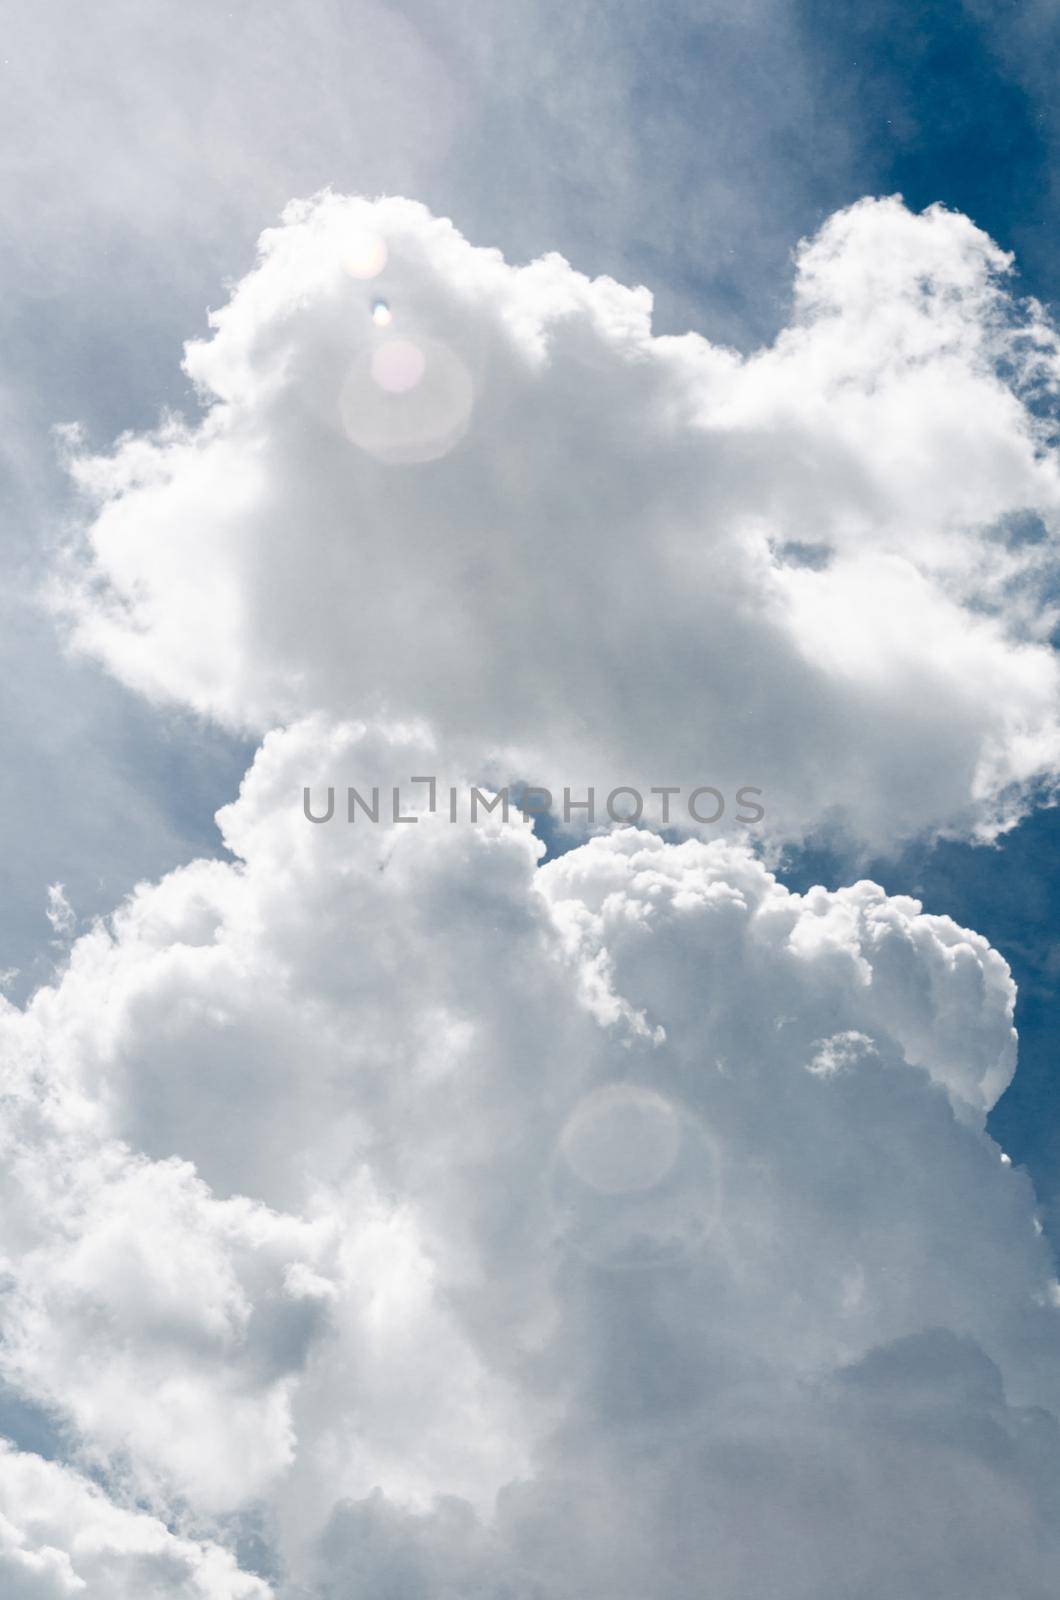 Incredibly wonderful lush cumulus clouds against a blue sky - Image